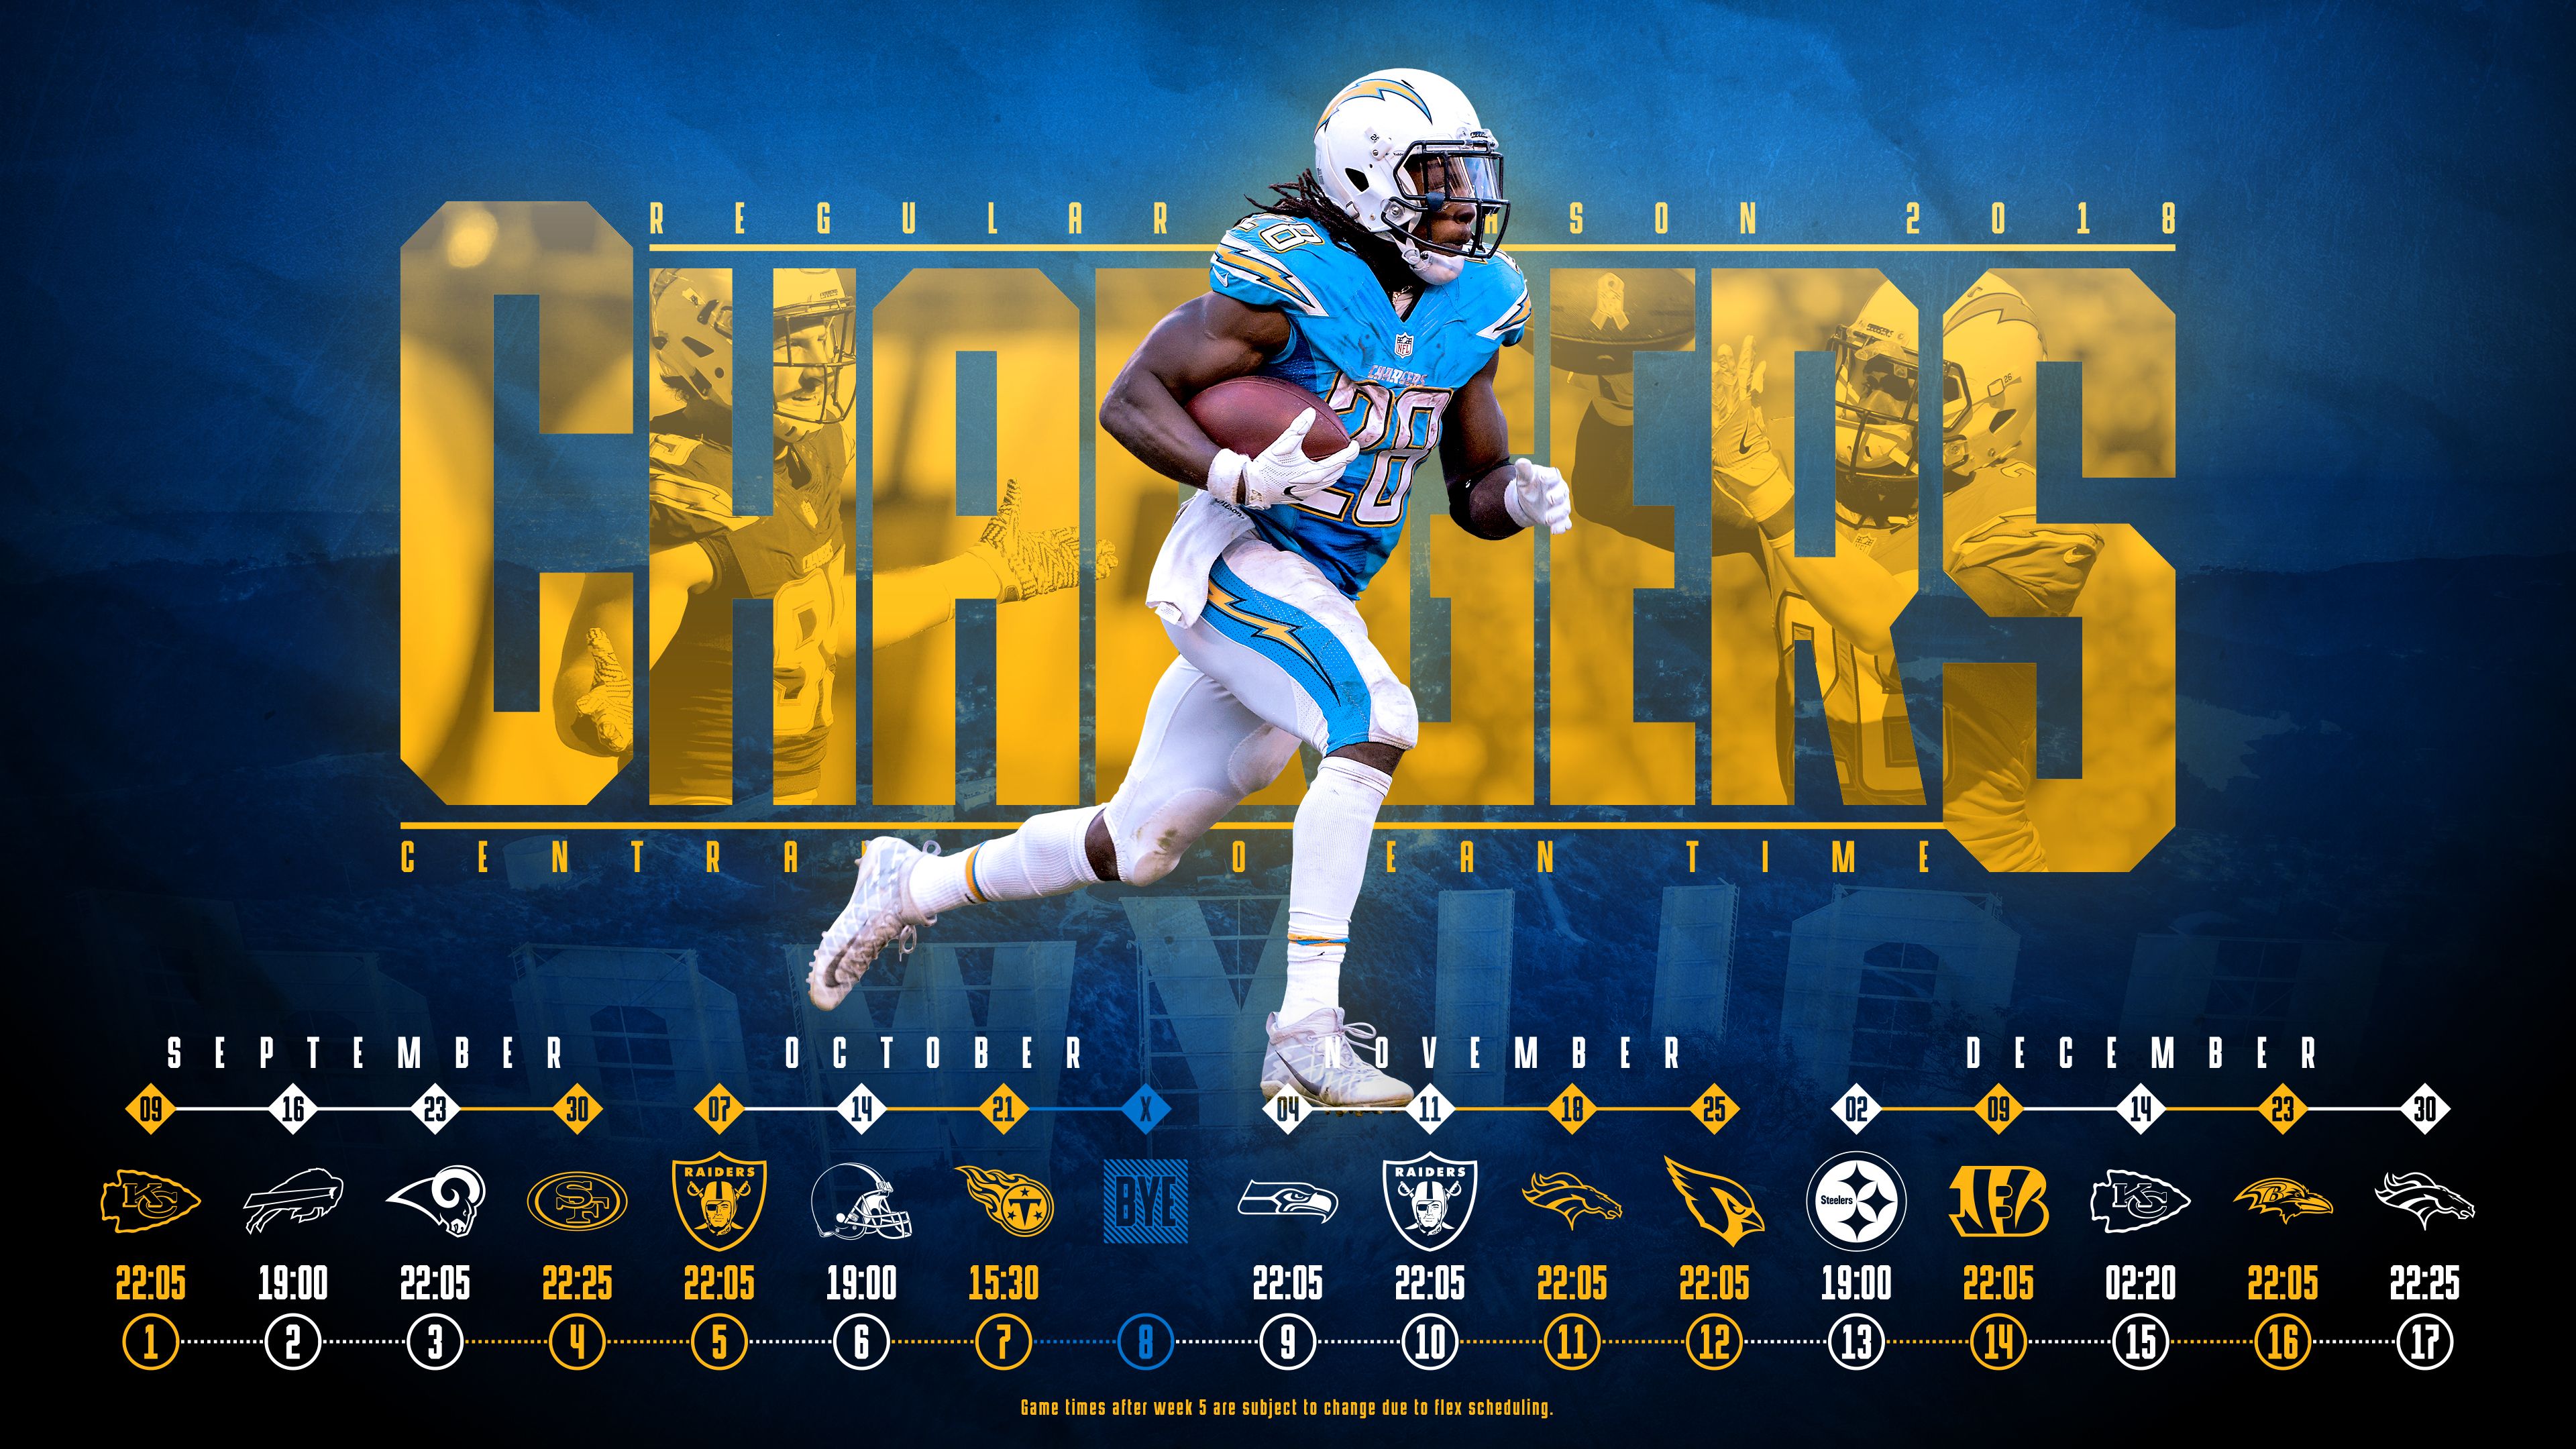 Share 67+ los angeles chargers wallpaper best